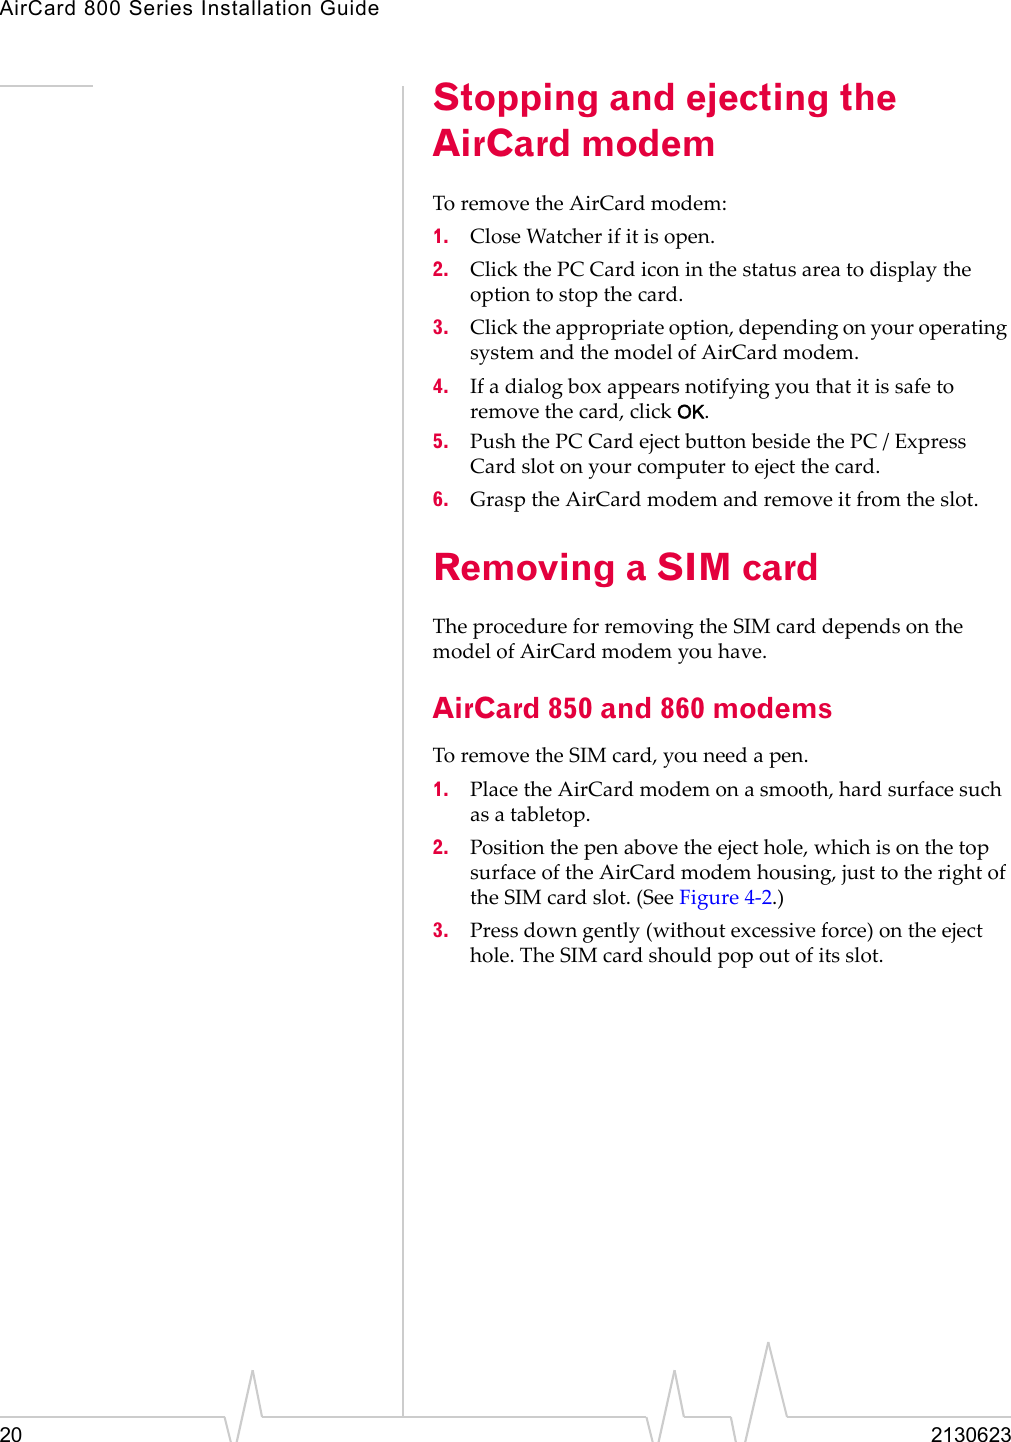 AirCard 800 Series Installation Guide20 2130623Stopping and ejecting the AirCard modemToremovetheAirCardmodem:1. CloseWatcherifitisopen.2. ClickthePCCardiconinthestatusareatodisplaytheoptiontostopthecard.3. Clicktheappropriateoption,dependingonyouroperatingsystemandthemodelofAirCardmodem.4. Ifadialogboxappearsnotifyingyouthatitissafetoremovethecard,clickOK.5. PushthePCCardejectbuttonbesidethePC/ExpressCardslotonyourcomputertoejectthecard.6. GrasptheAirCardmodemandremoveitfromtheslot.Removing a SIM cardTheprocedureforremovingtheSIMcarddependsonthemodelofAirCardmodemyouhave.AirCard 850 and 860 modemsToremovetheSIMcard,youneedapen.1. PlacetheAirCardmodemonasmooth,hardsurfacesuchasatabletop.2. Positionthepenabovetheejecthole,whichisonthetopsurfaceoftheAirCardmodemhousing,justtotherightoftheSIMcardslot.(SeeFigure 4‐2.)3. Pressdowngently(withoutexcessiveforce)ontheejecthole.TheSIMcardshouldpopoutofitsslot.